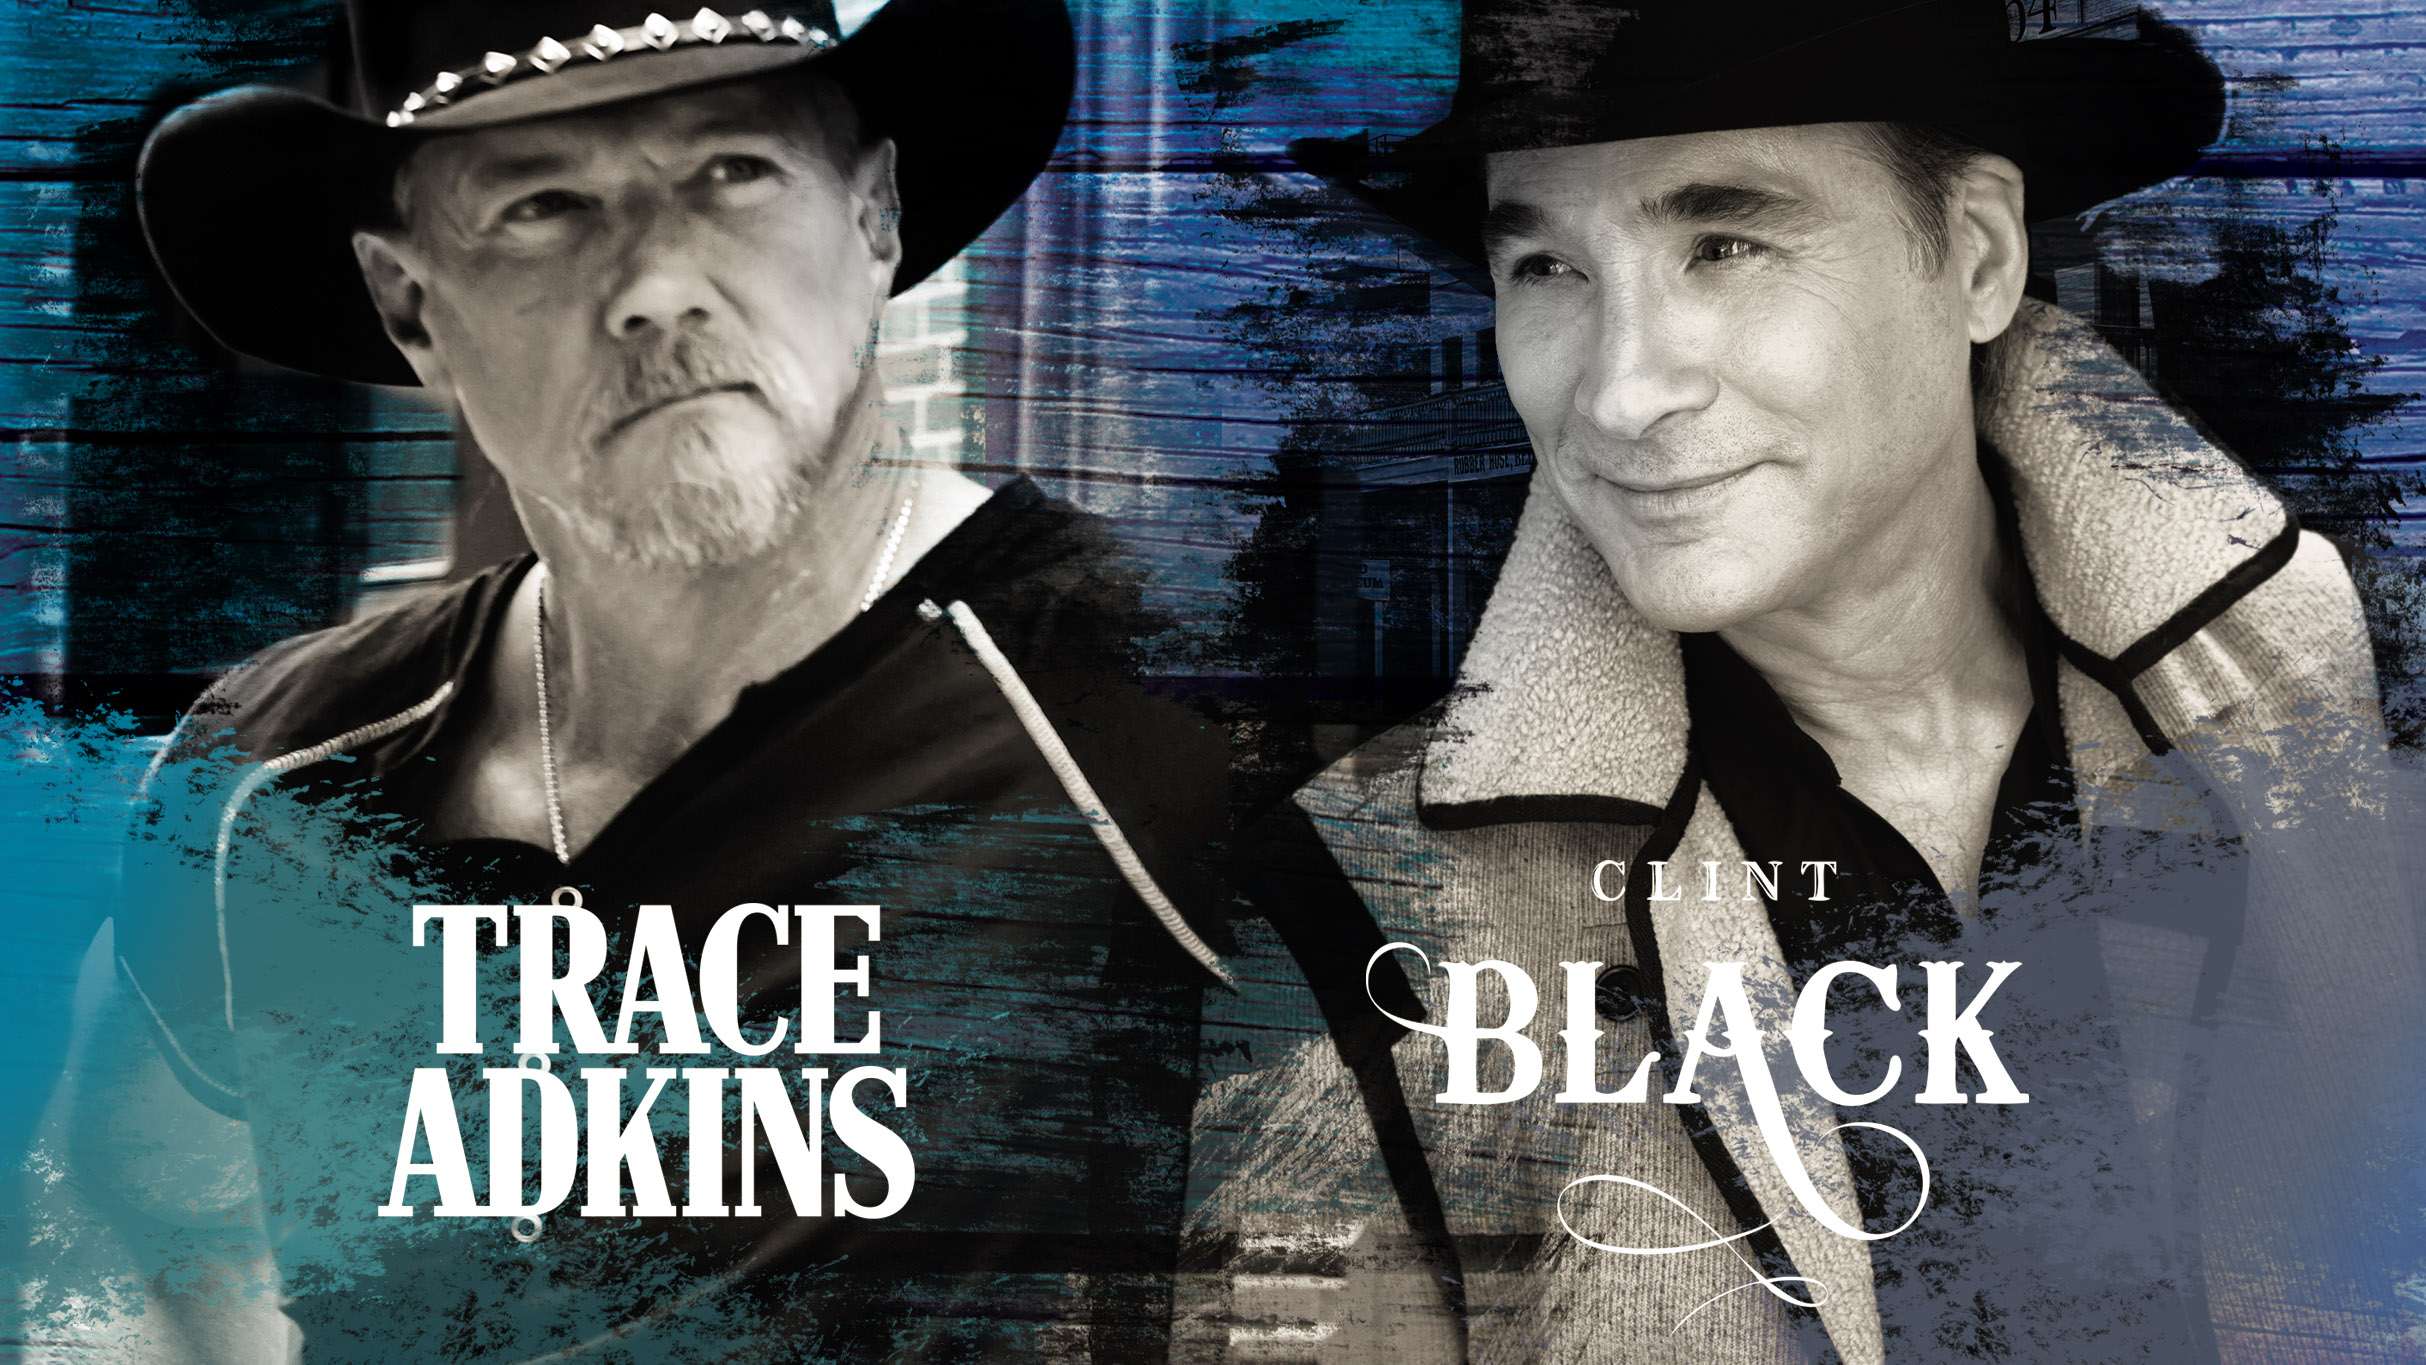 Win Trace Adkins Meet & Greets And a Guitar!